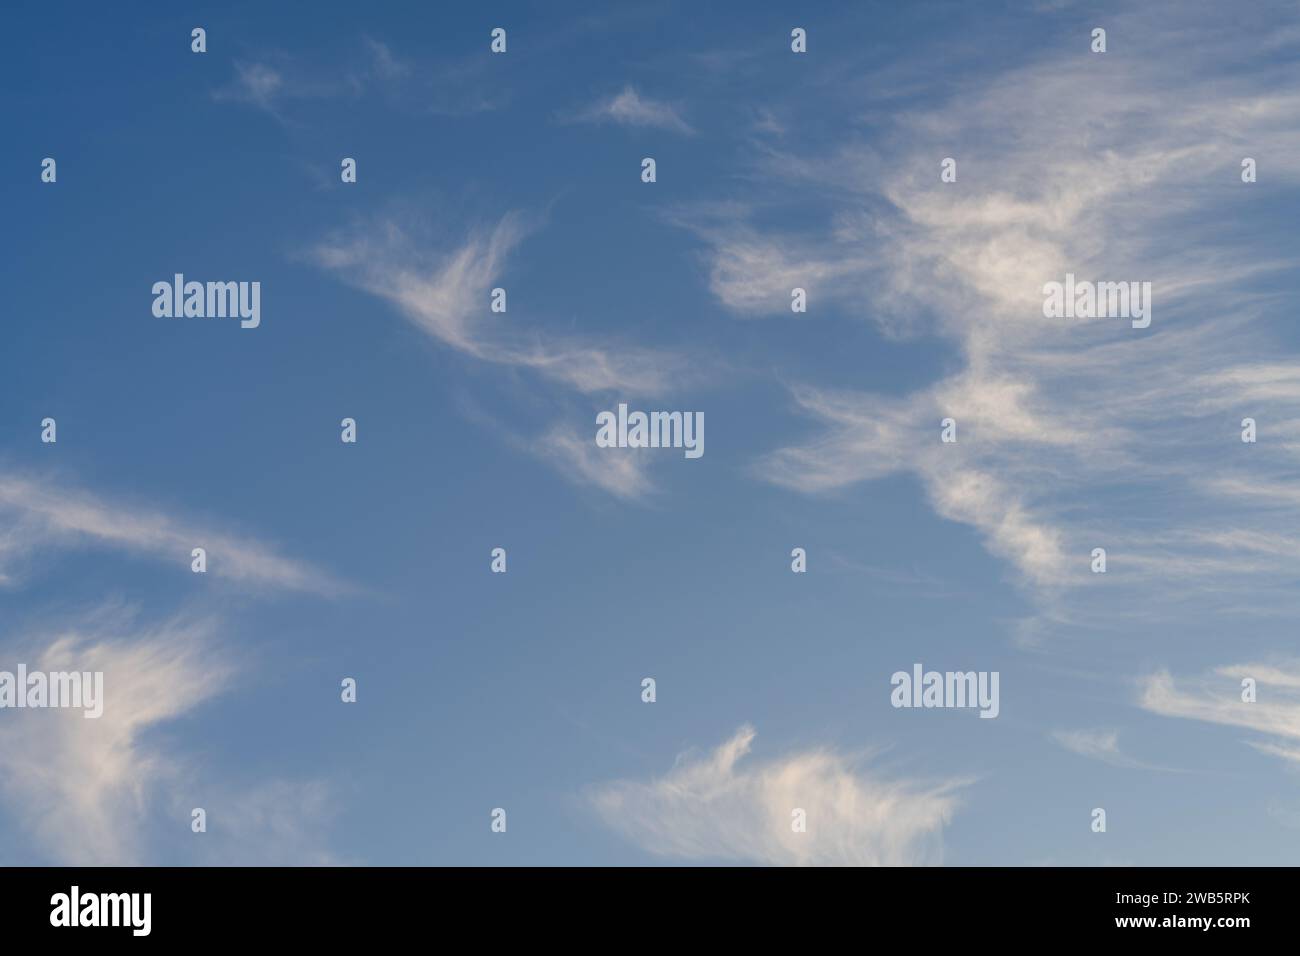 Sky images to be used for editorial, advertising or graphic arts applications. Stock Photo